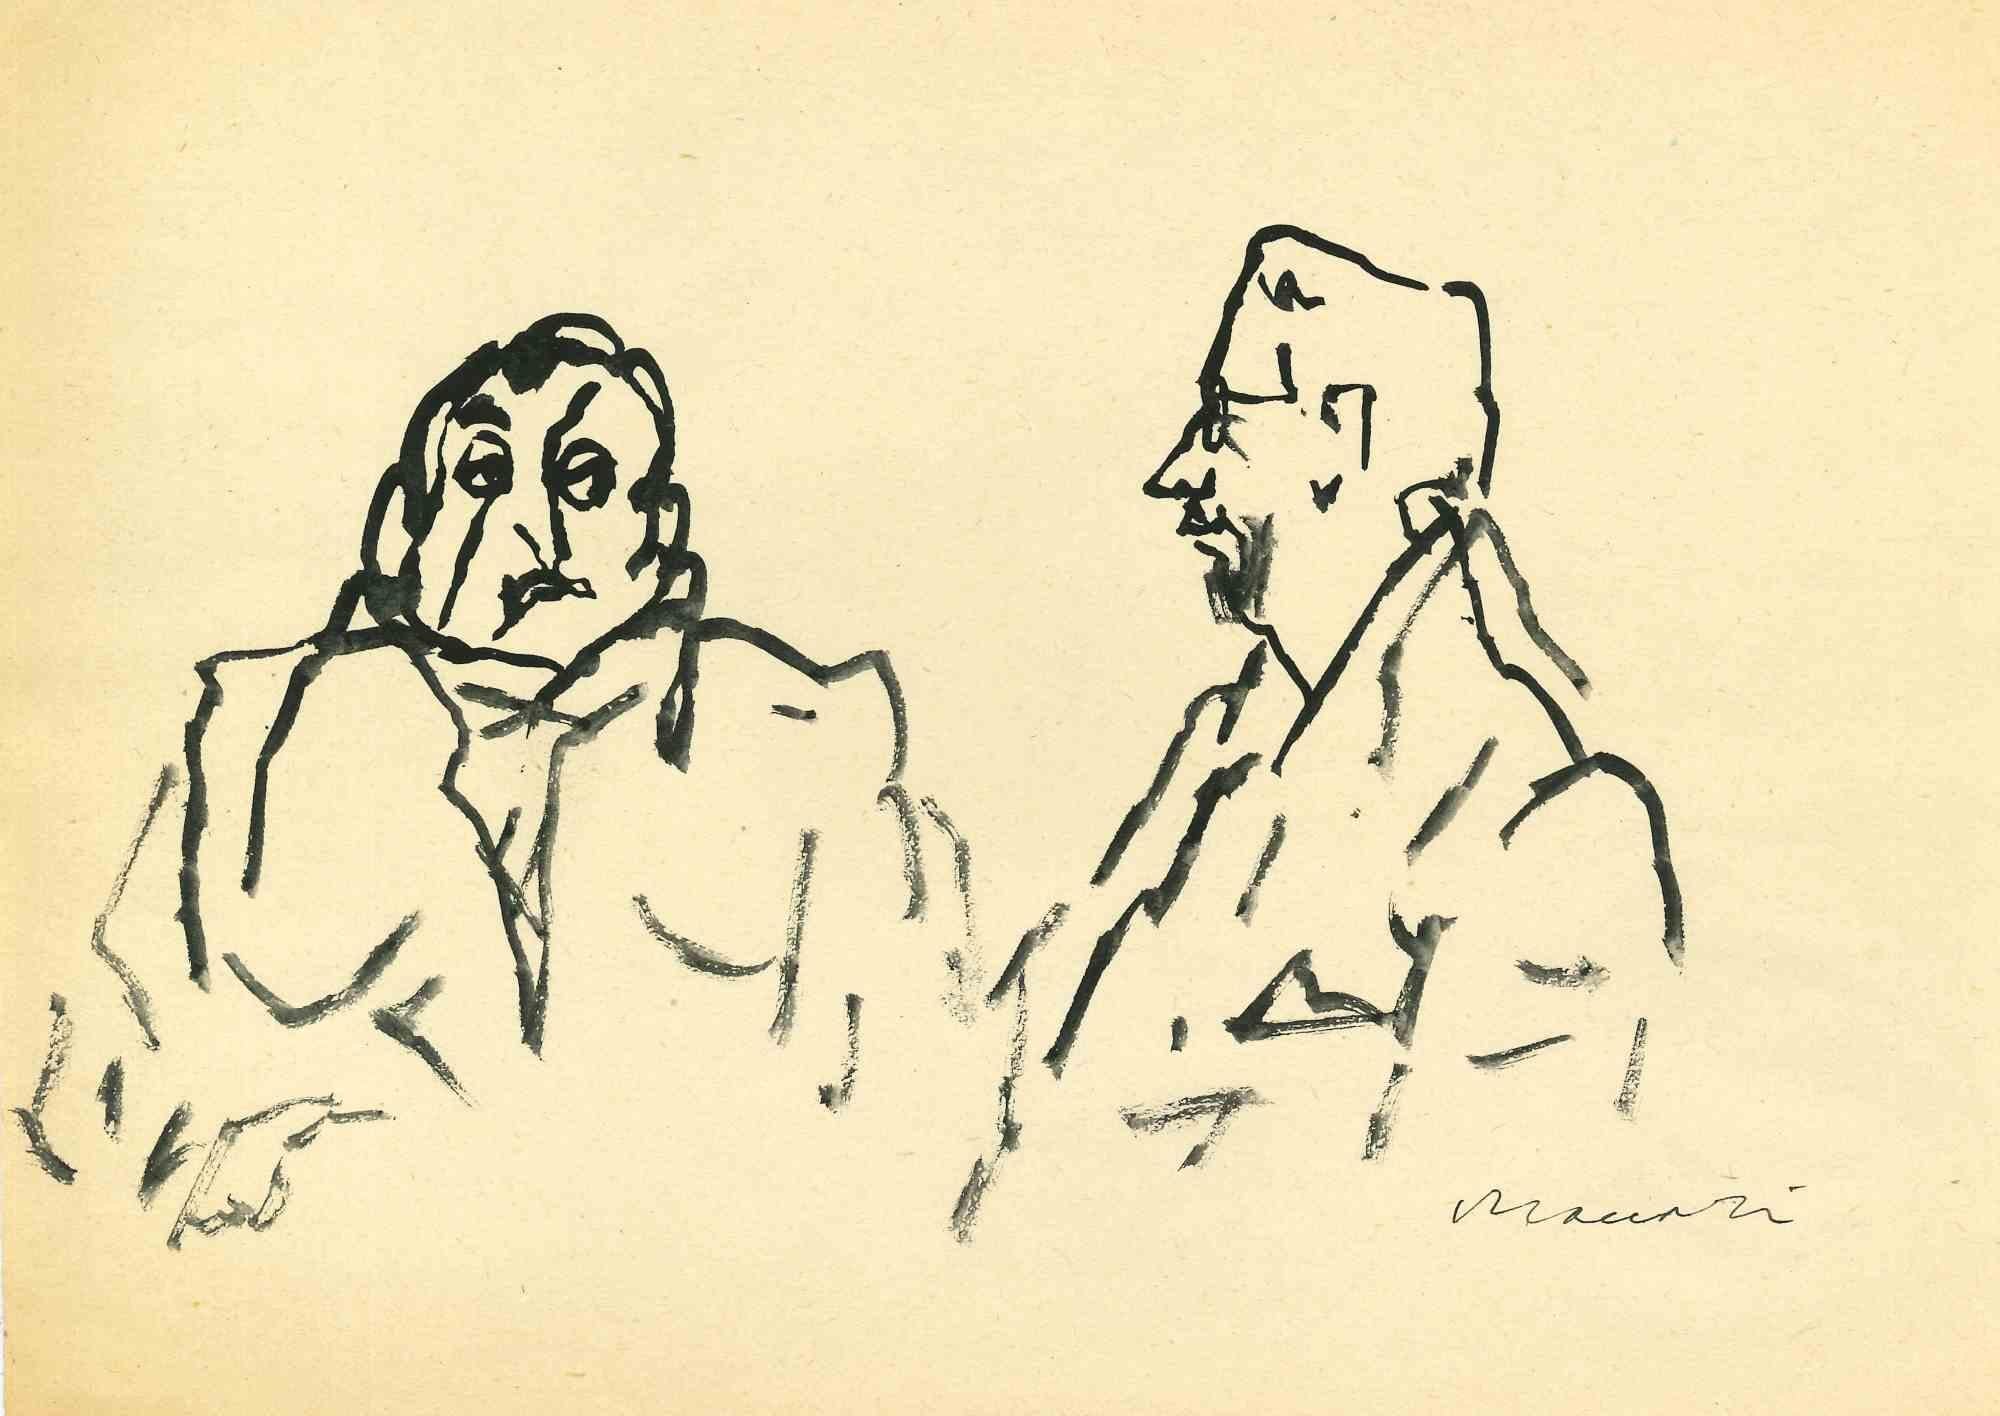 Figures is a black permanent marker Drawing realized by Mino Maccari  (1924-1989) in the Mid-20th Century.

Hand-signed on the lower.

Good conditions.

Mino Maccari (Siena, 1924-Rome, June 16, 1989) was an Italian writer, painter, engraver and